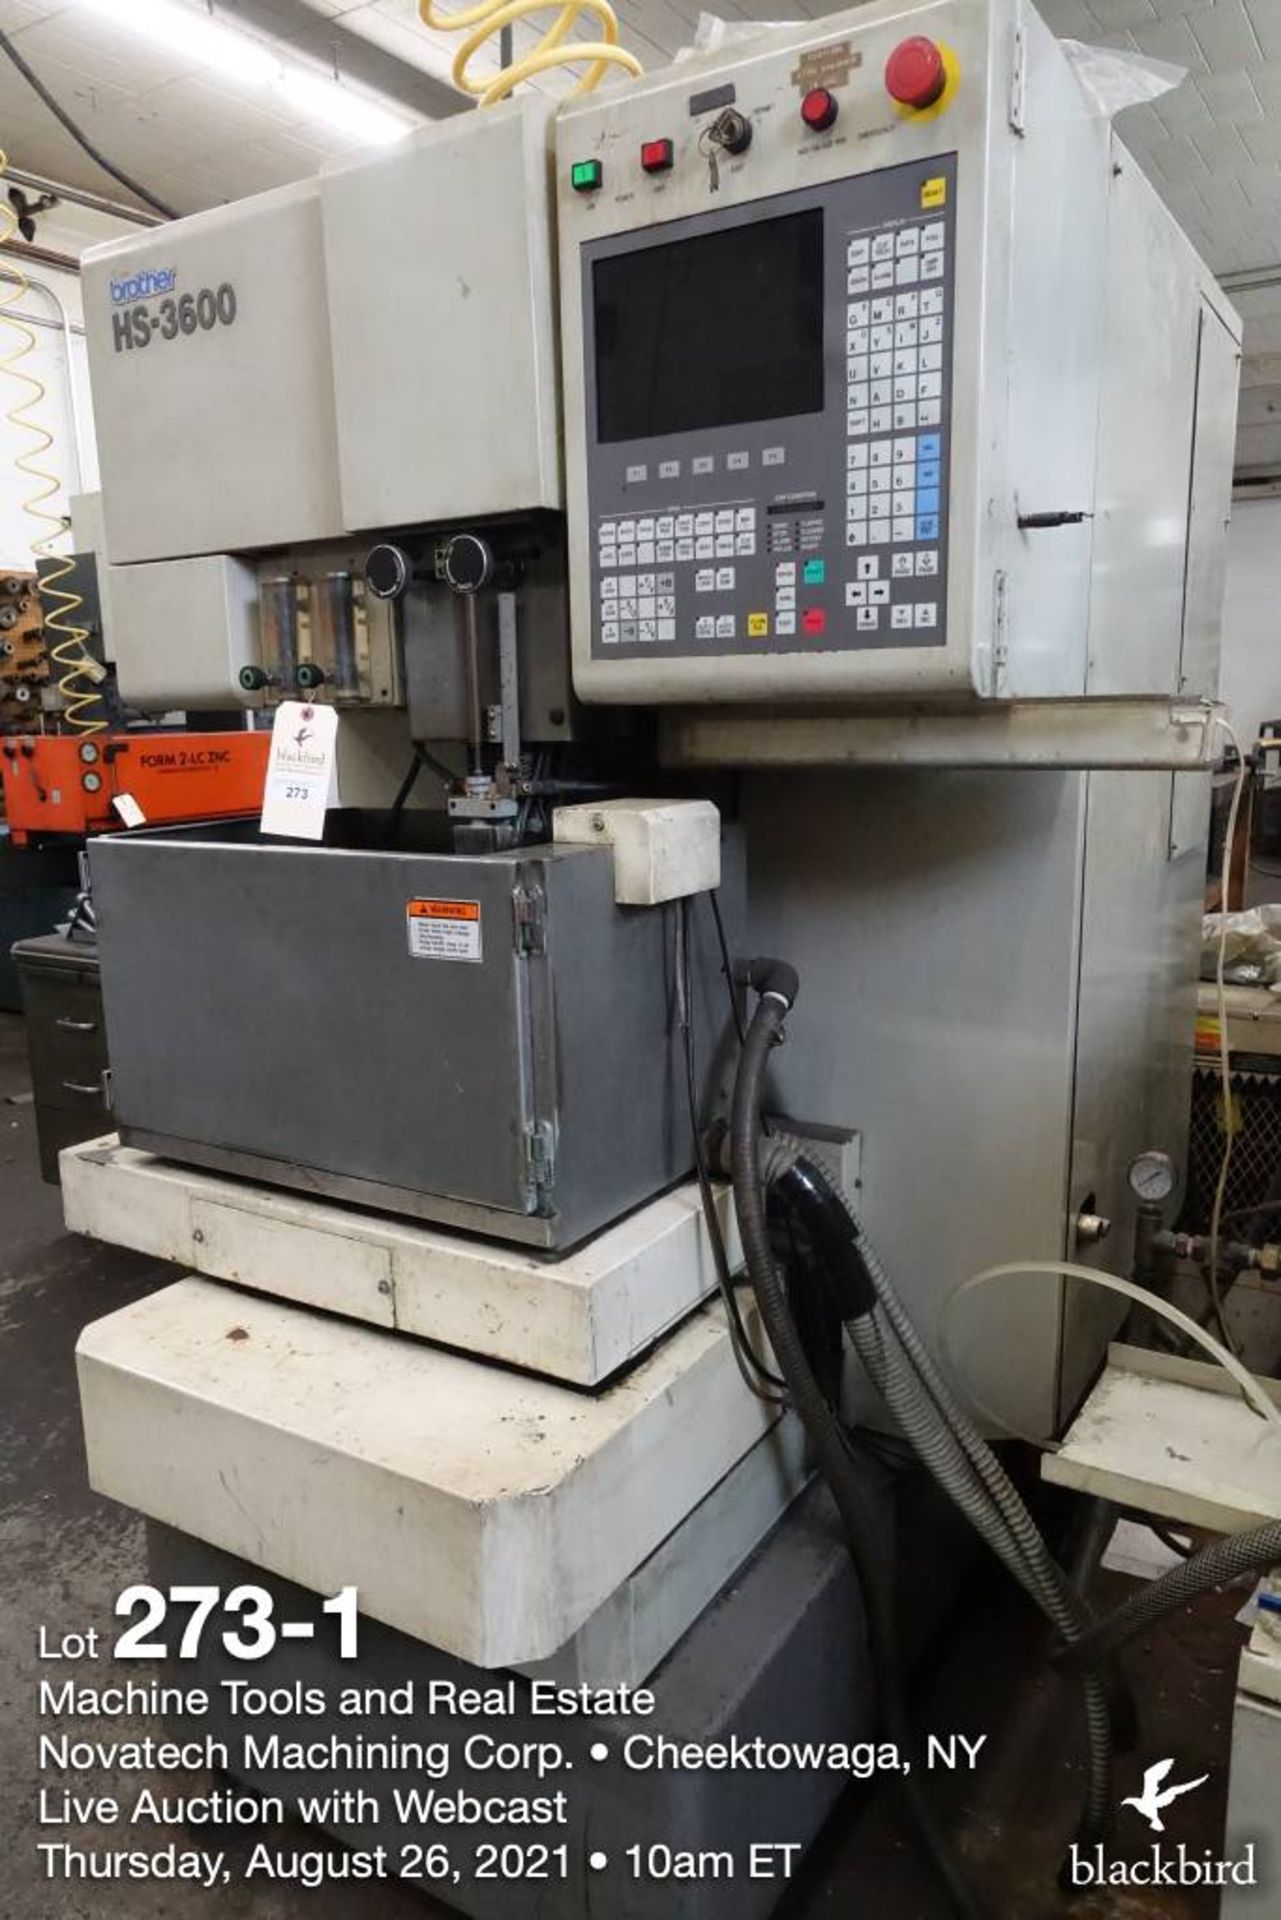 Brother HS-3600 wire EDM, 1999